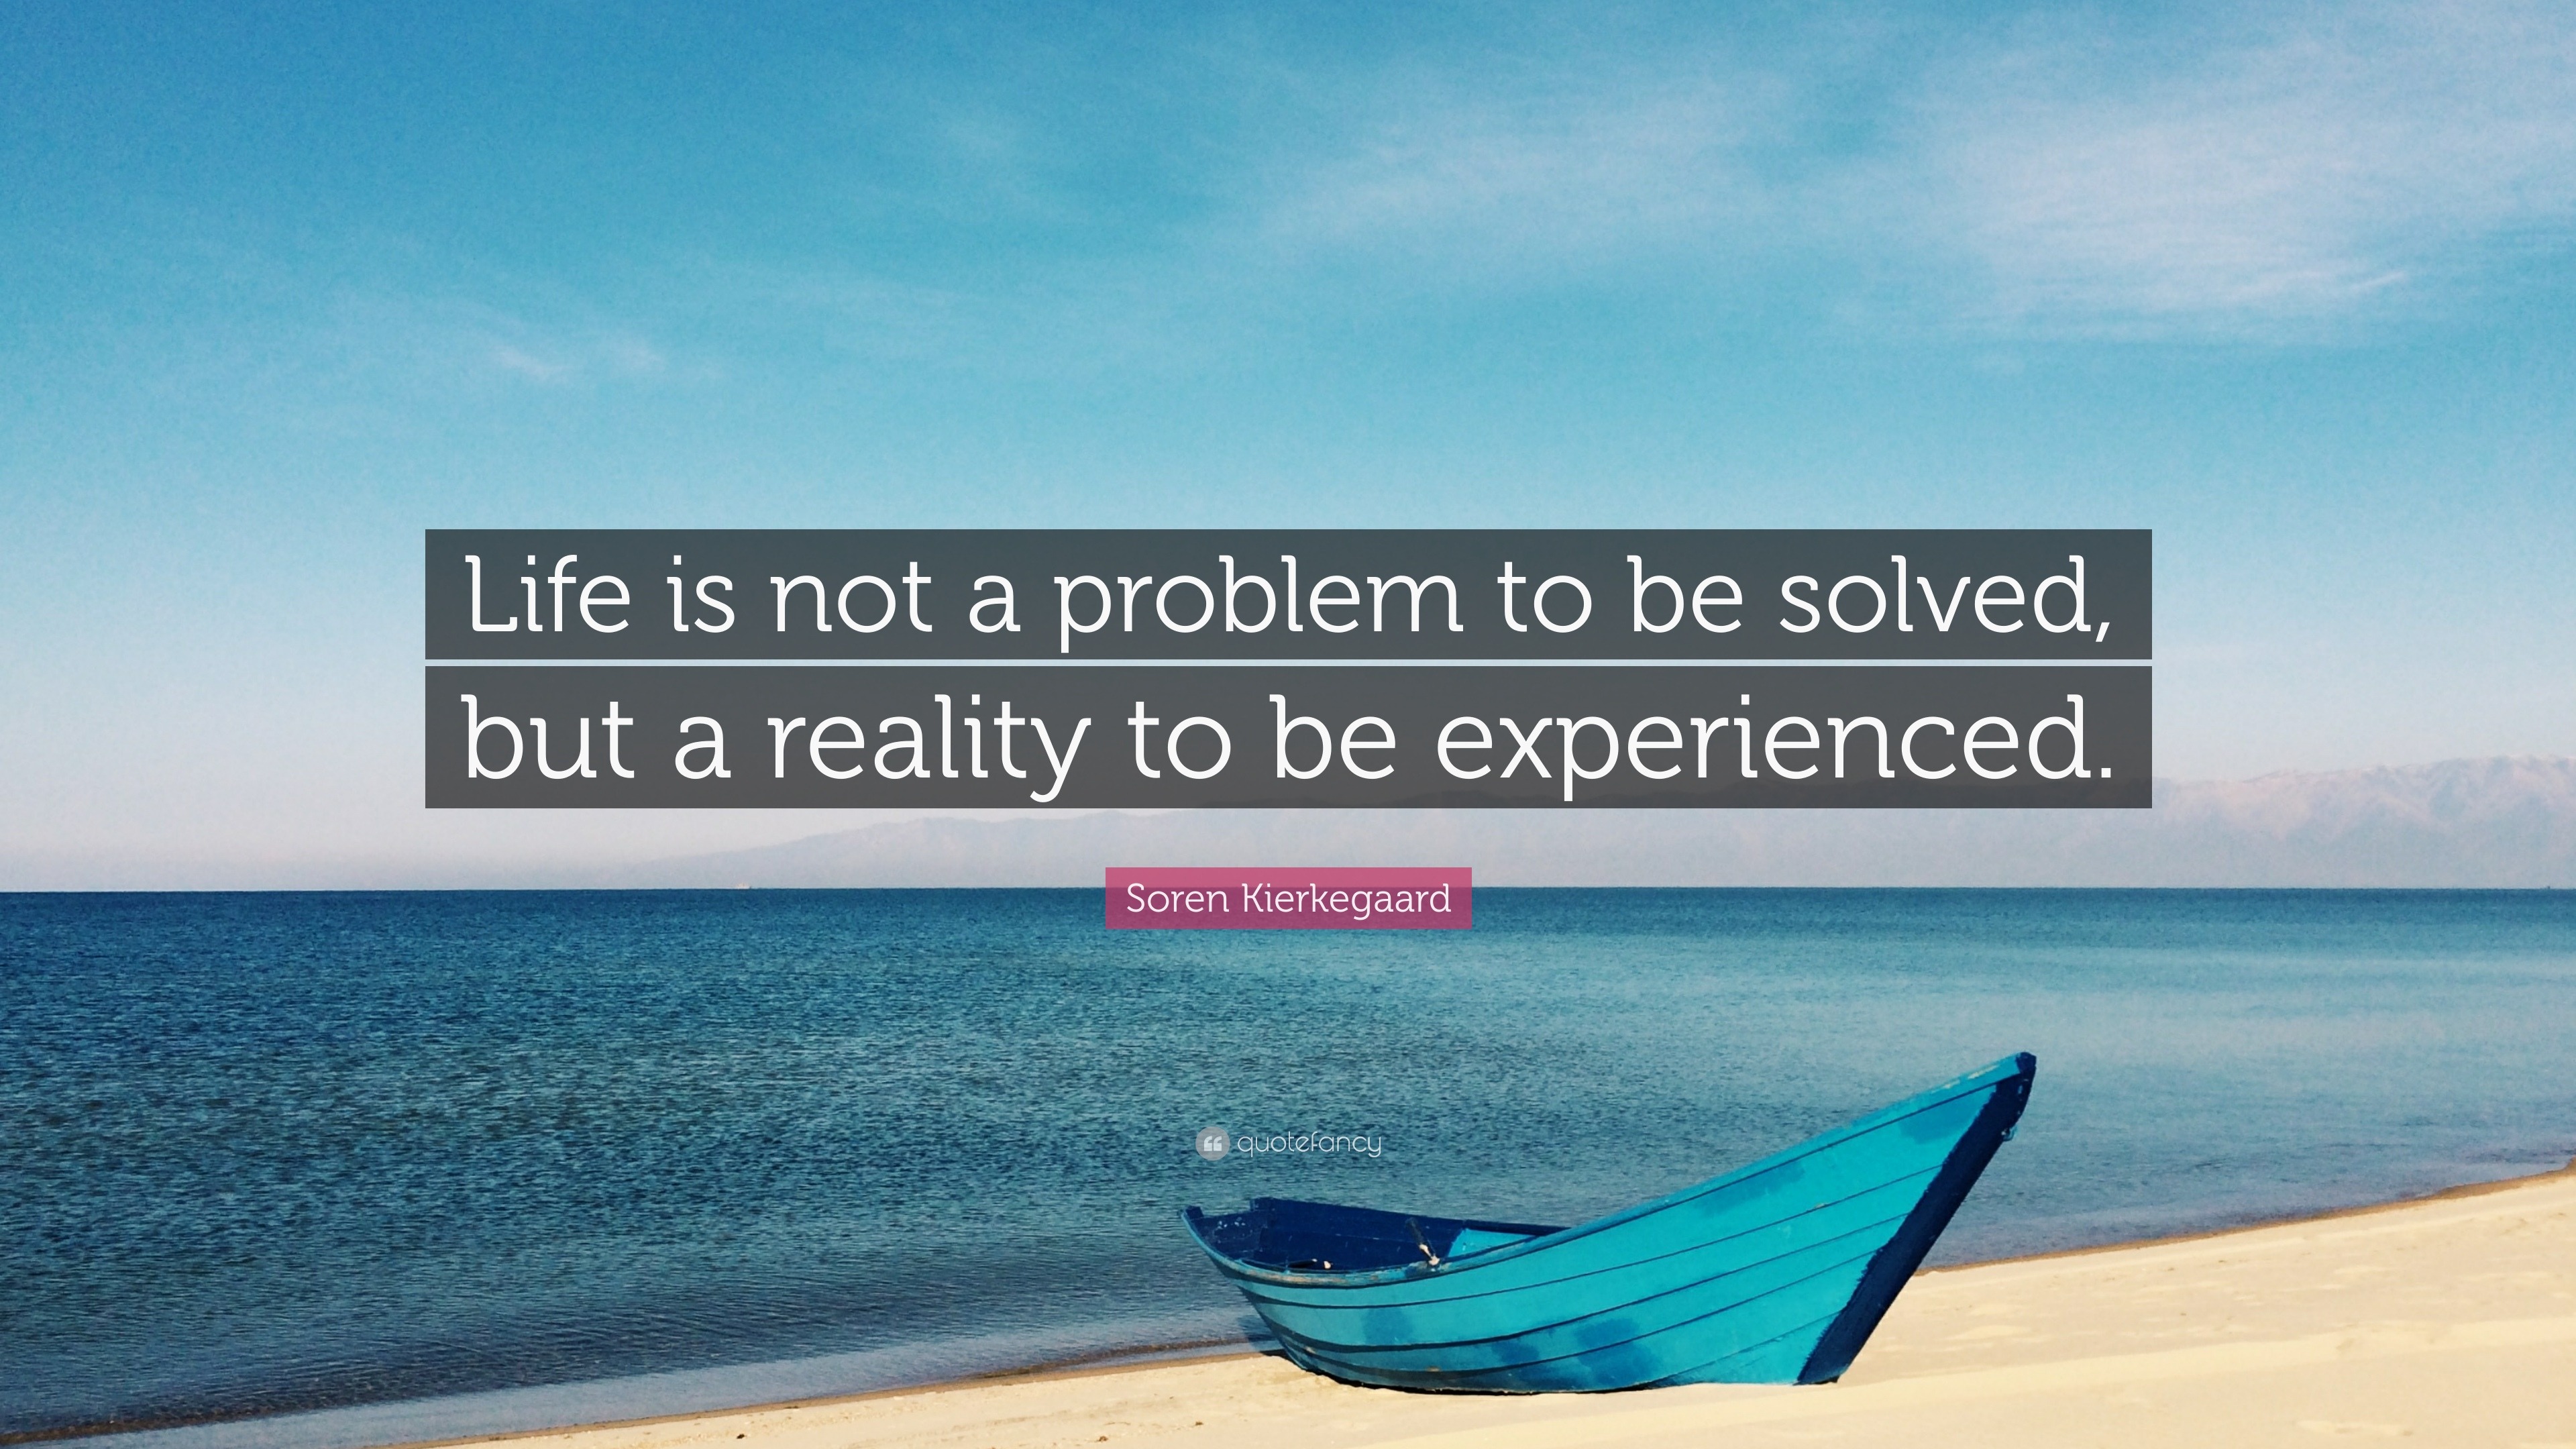 life is not a problem to be solved quotes